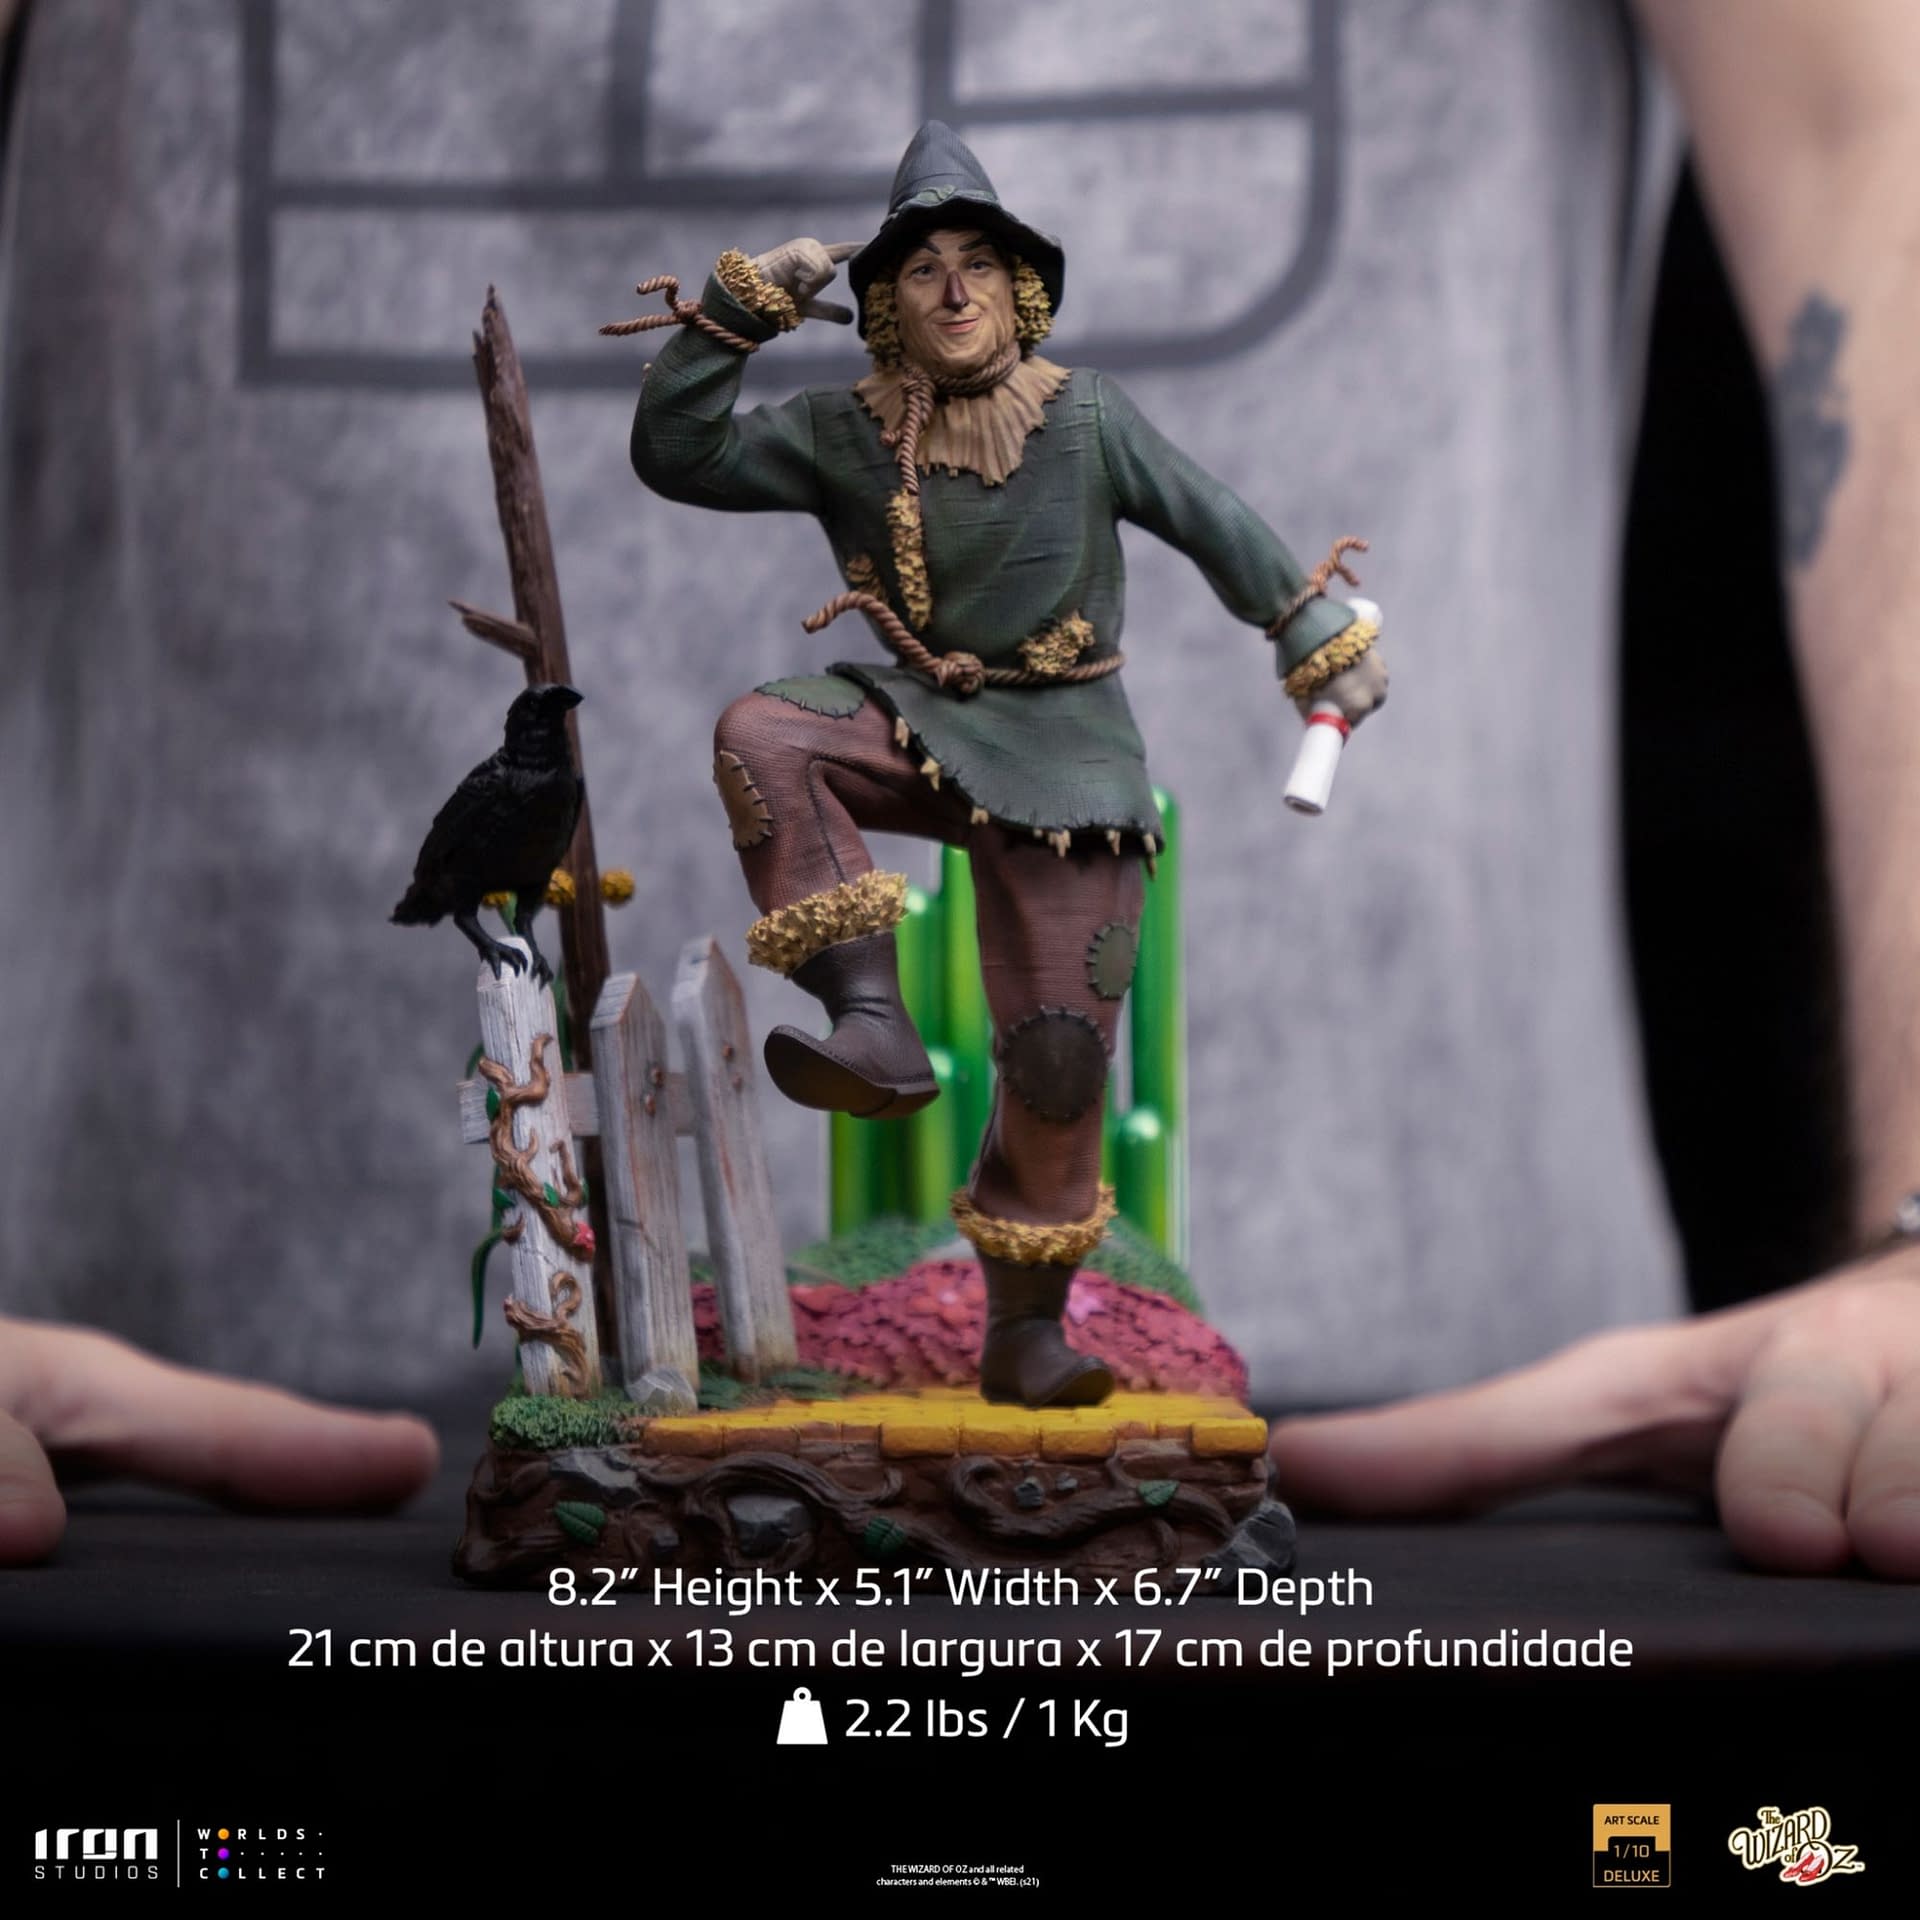 Iron Studios Reveals New The Wizard of Oz Statue with the Scarecrow